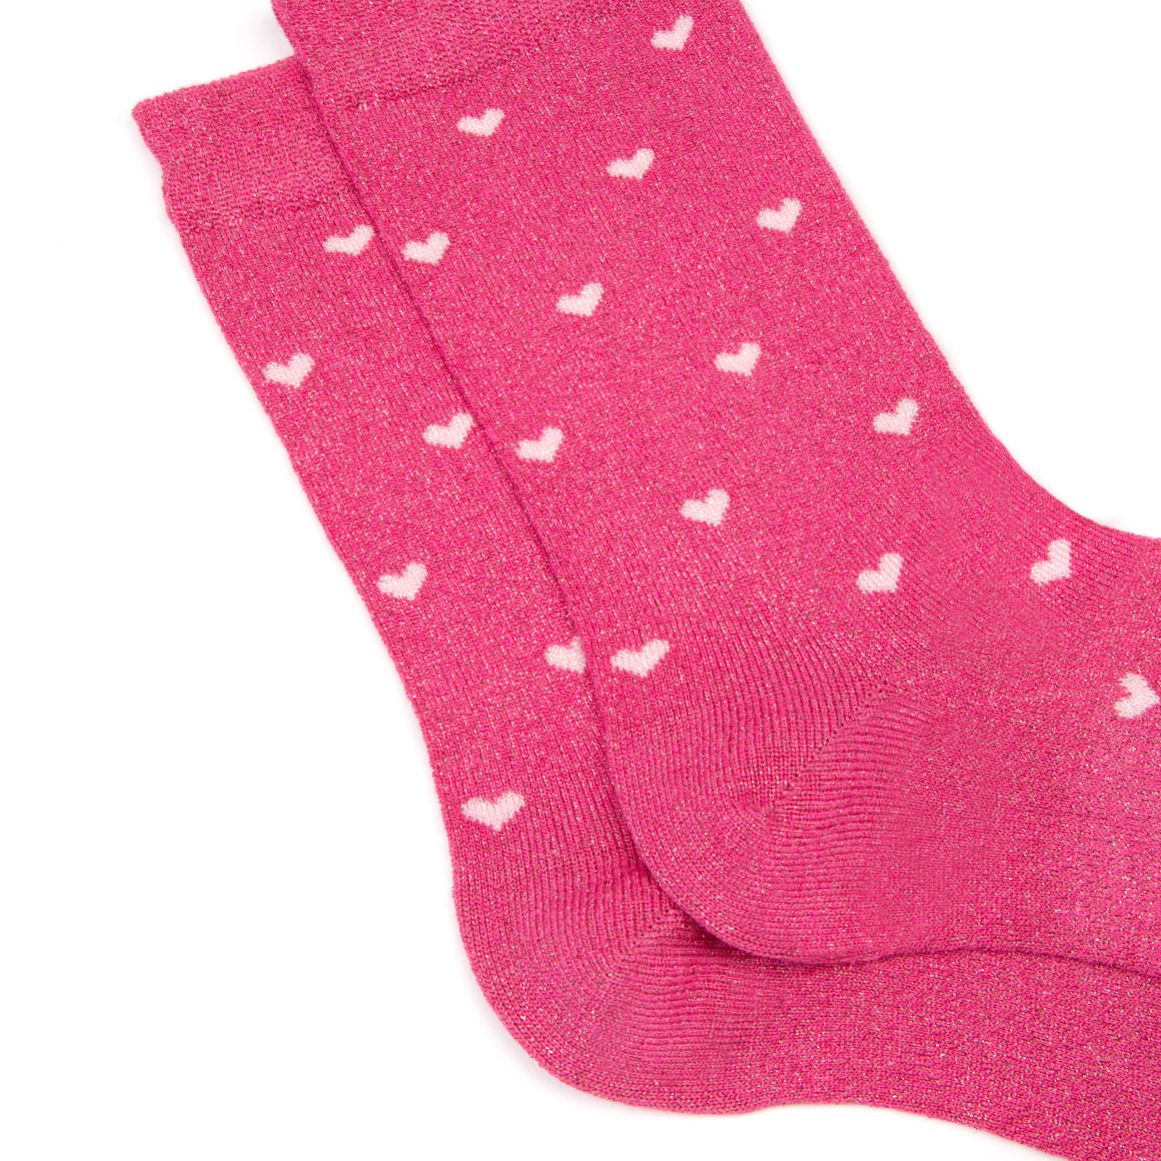 SELINA SPARKLY HEART SOCKS: PINK & BABY PINK – Air & Grace